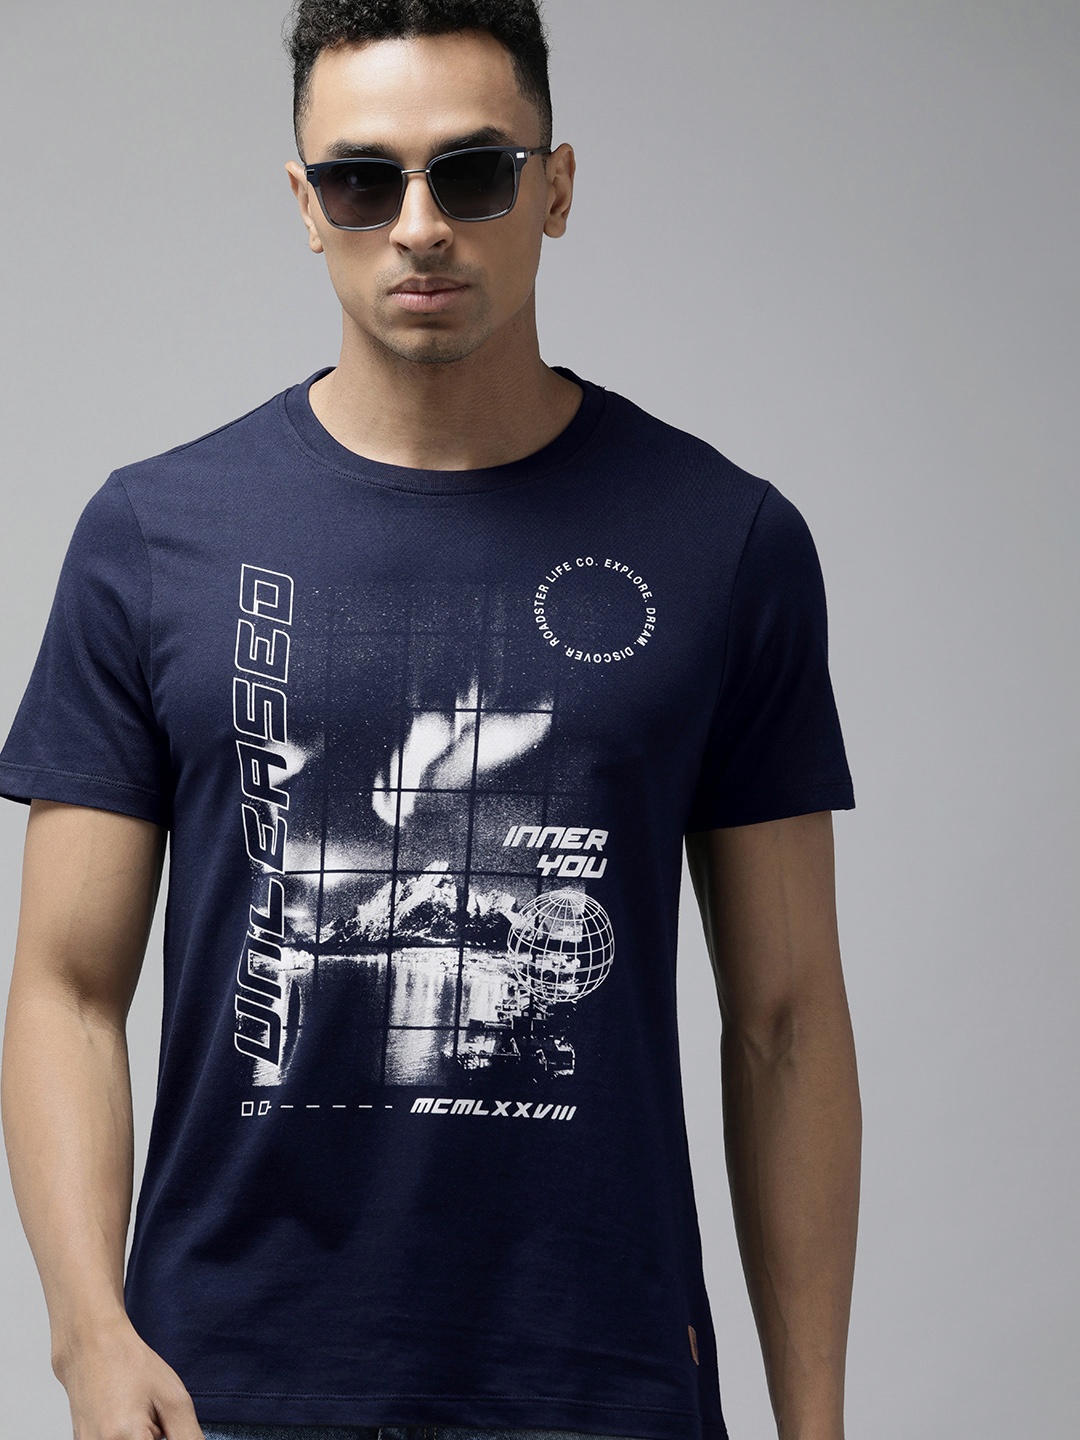 

The Roadster Lifestyle Co. Men Graphic Printed Pure Cotton T-shirt, Navy blue